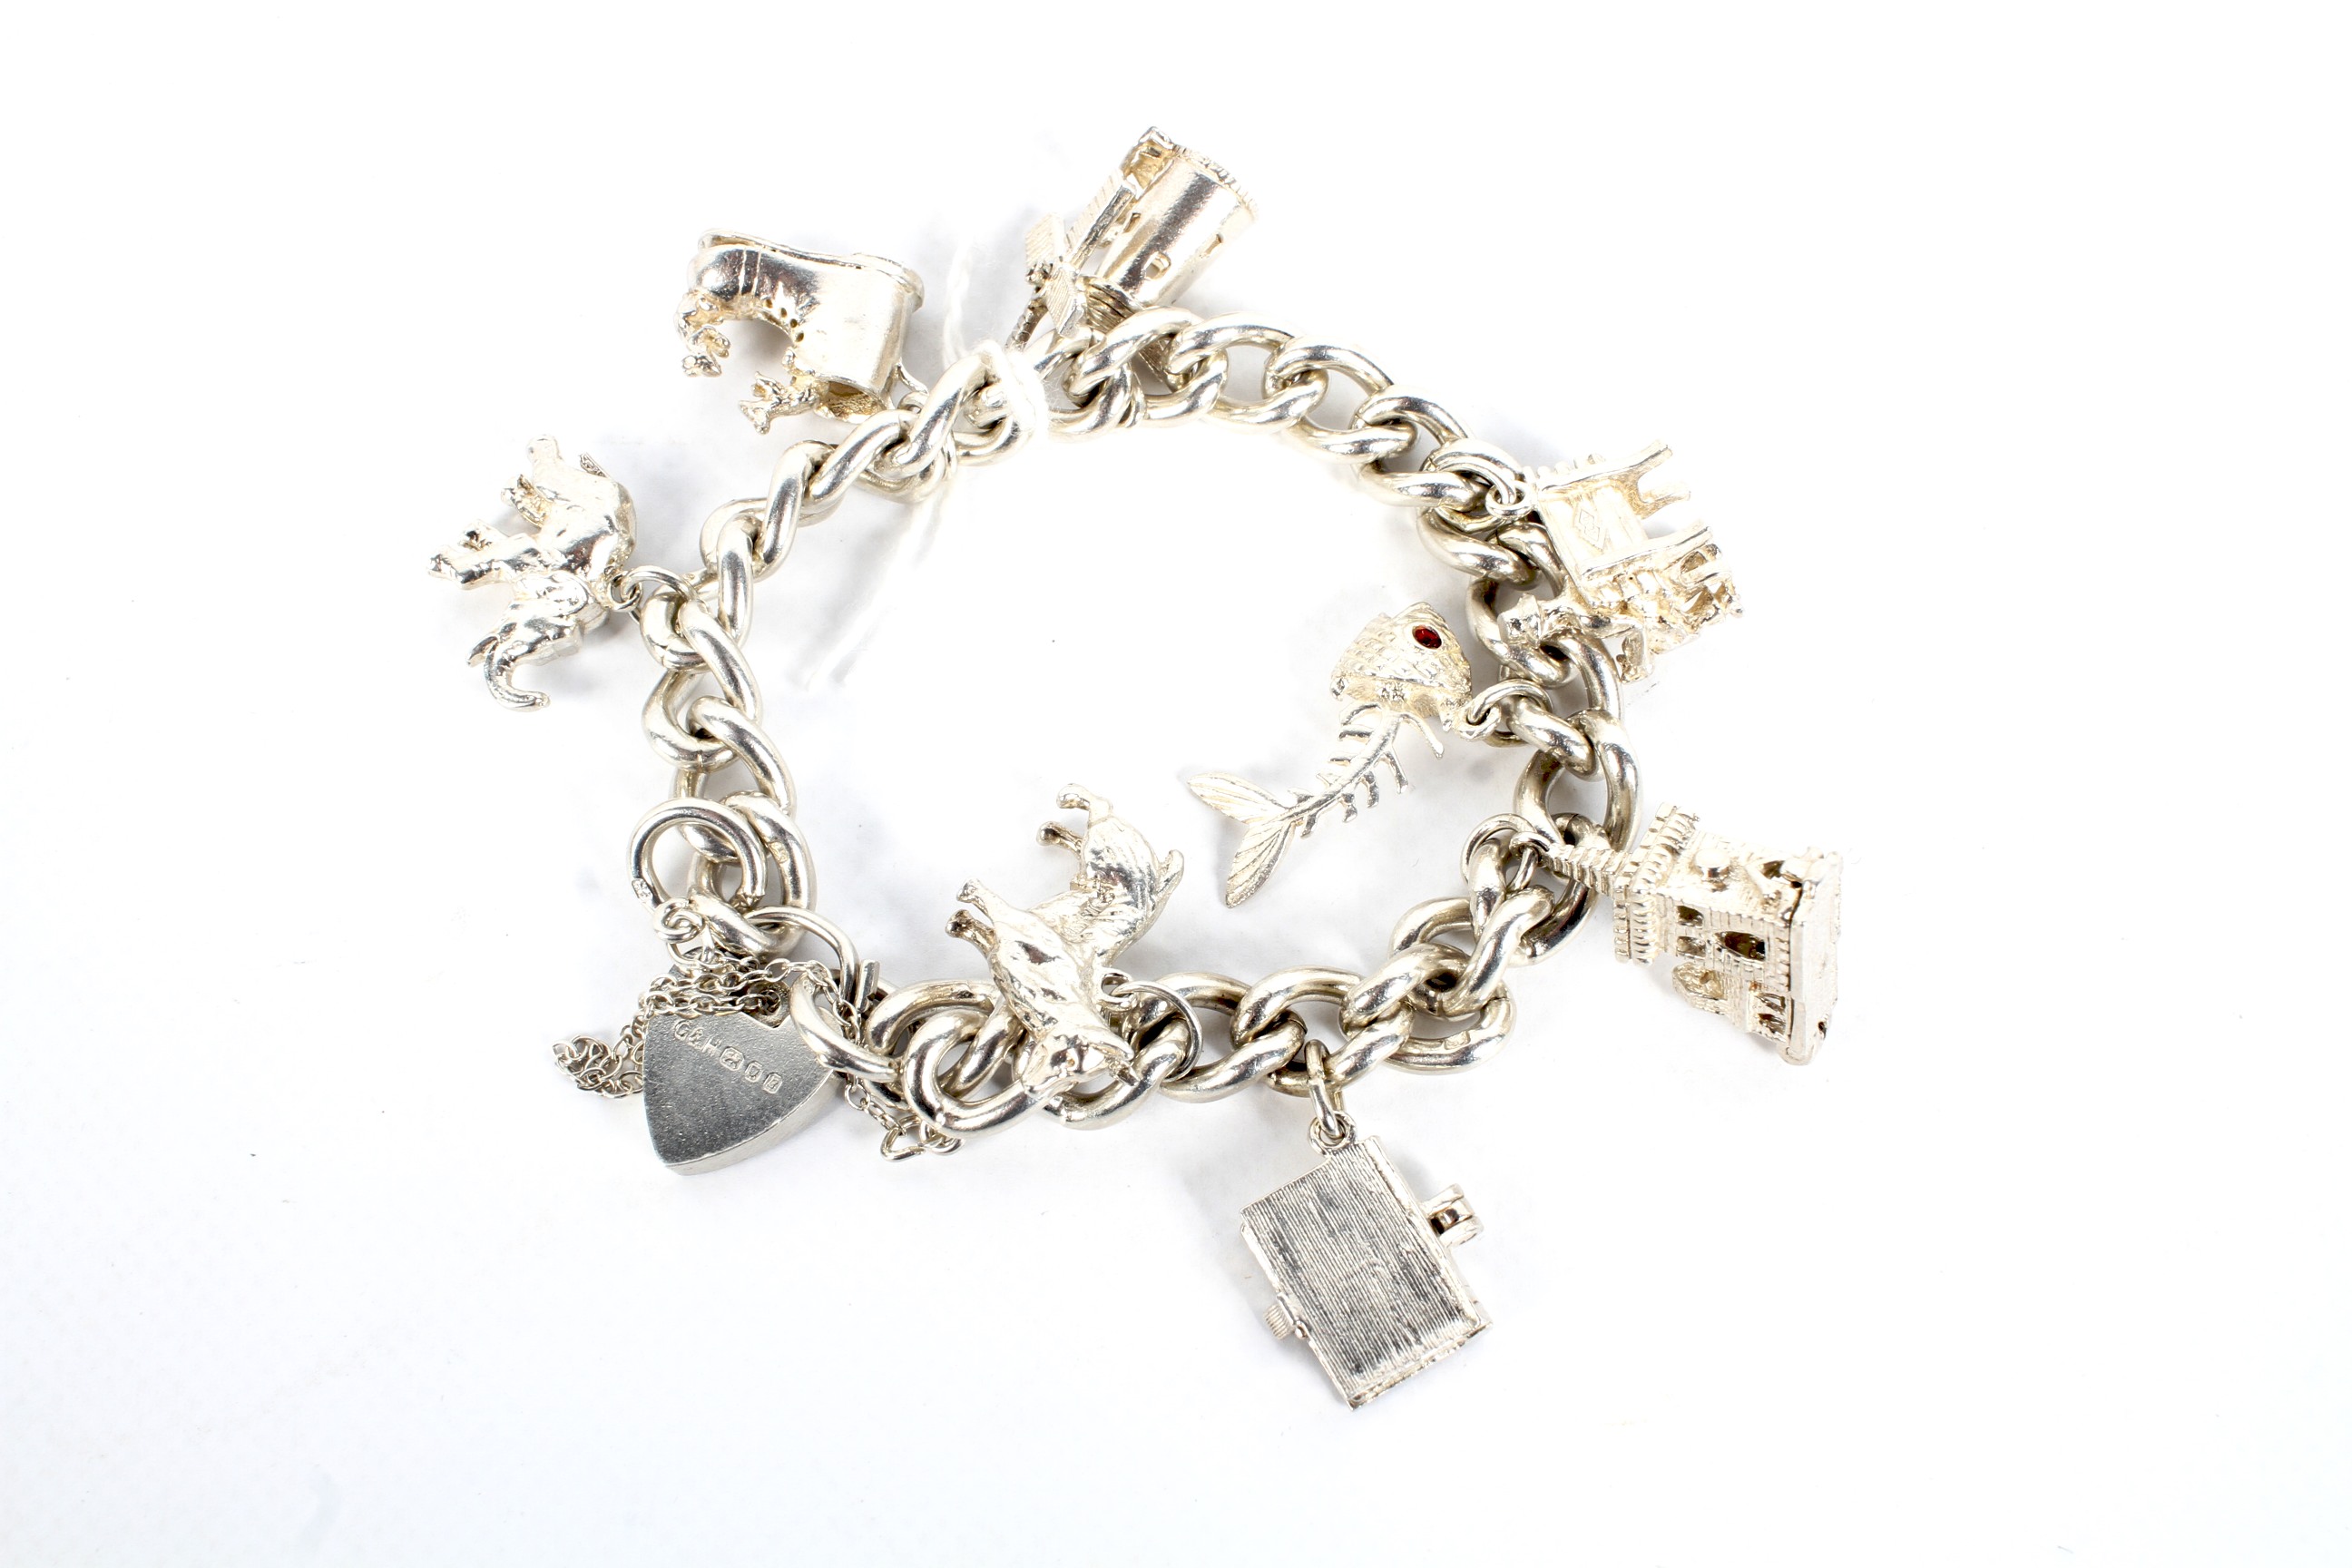 A silver charm bracelet with a heart lock and eight charms.